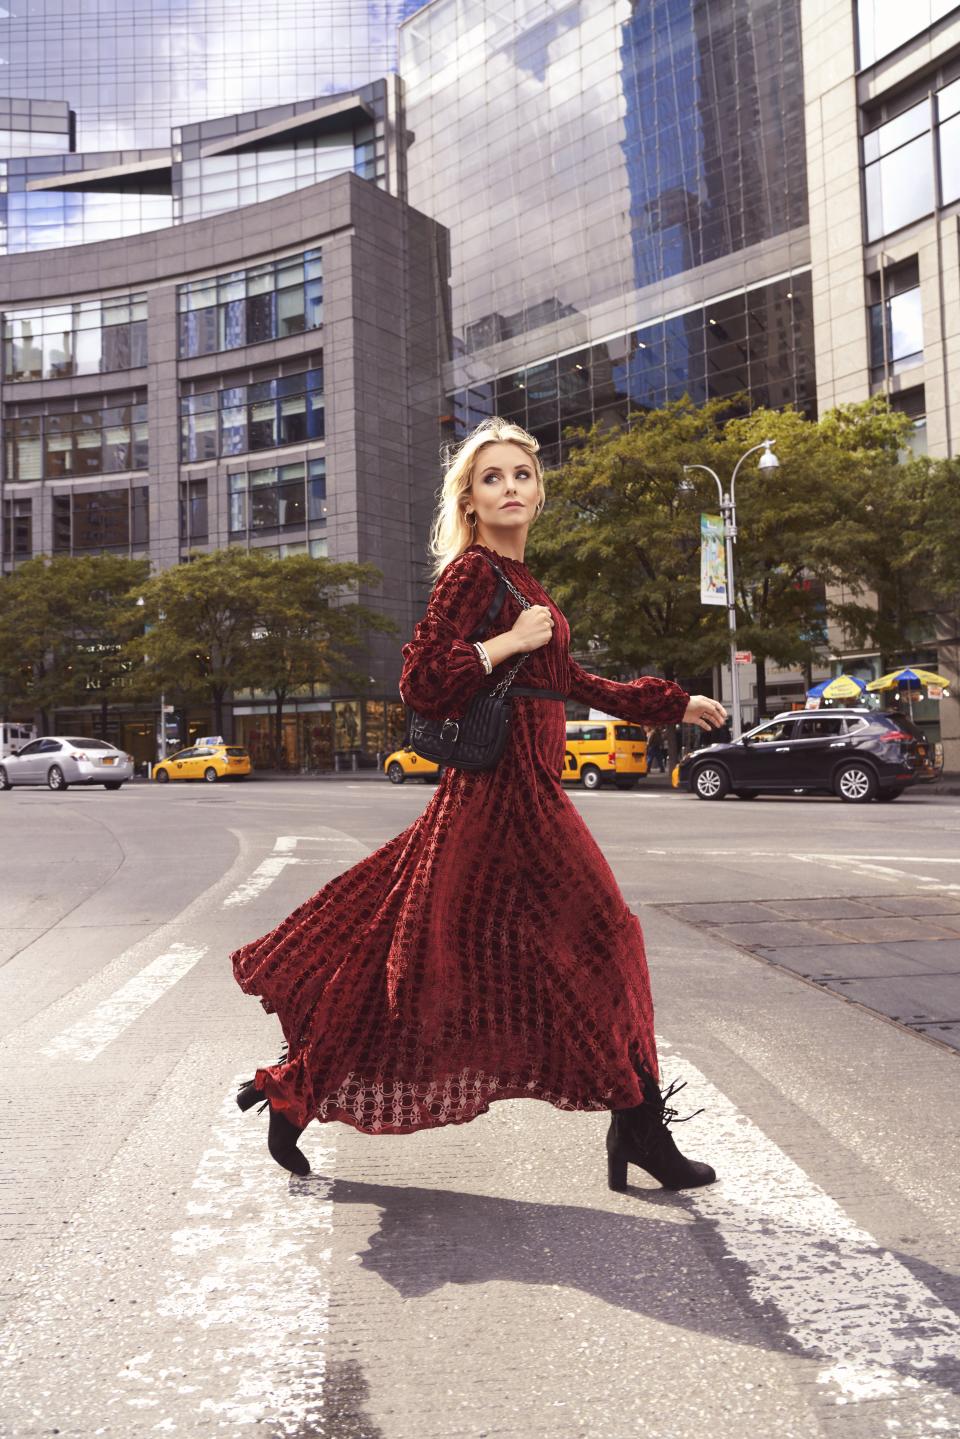 <p>International fashion photographer and influencer Lara Jade knows how to shop. She divulges her tips to triumph this holiday season while making the most of the experience along the way. <br></p>